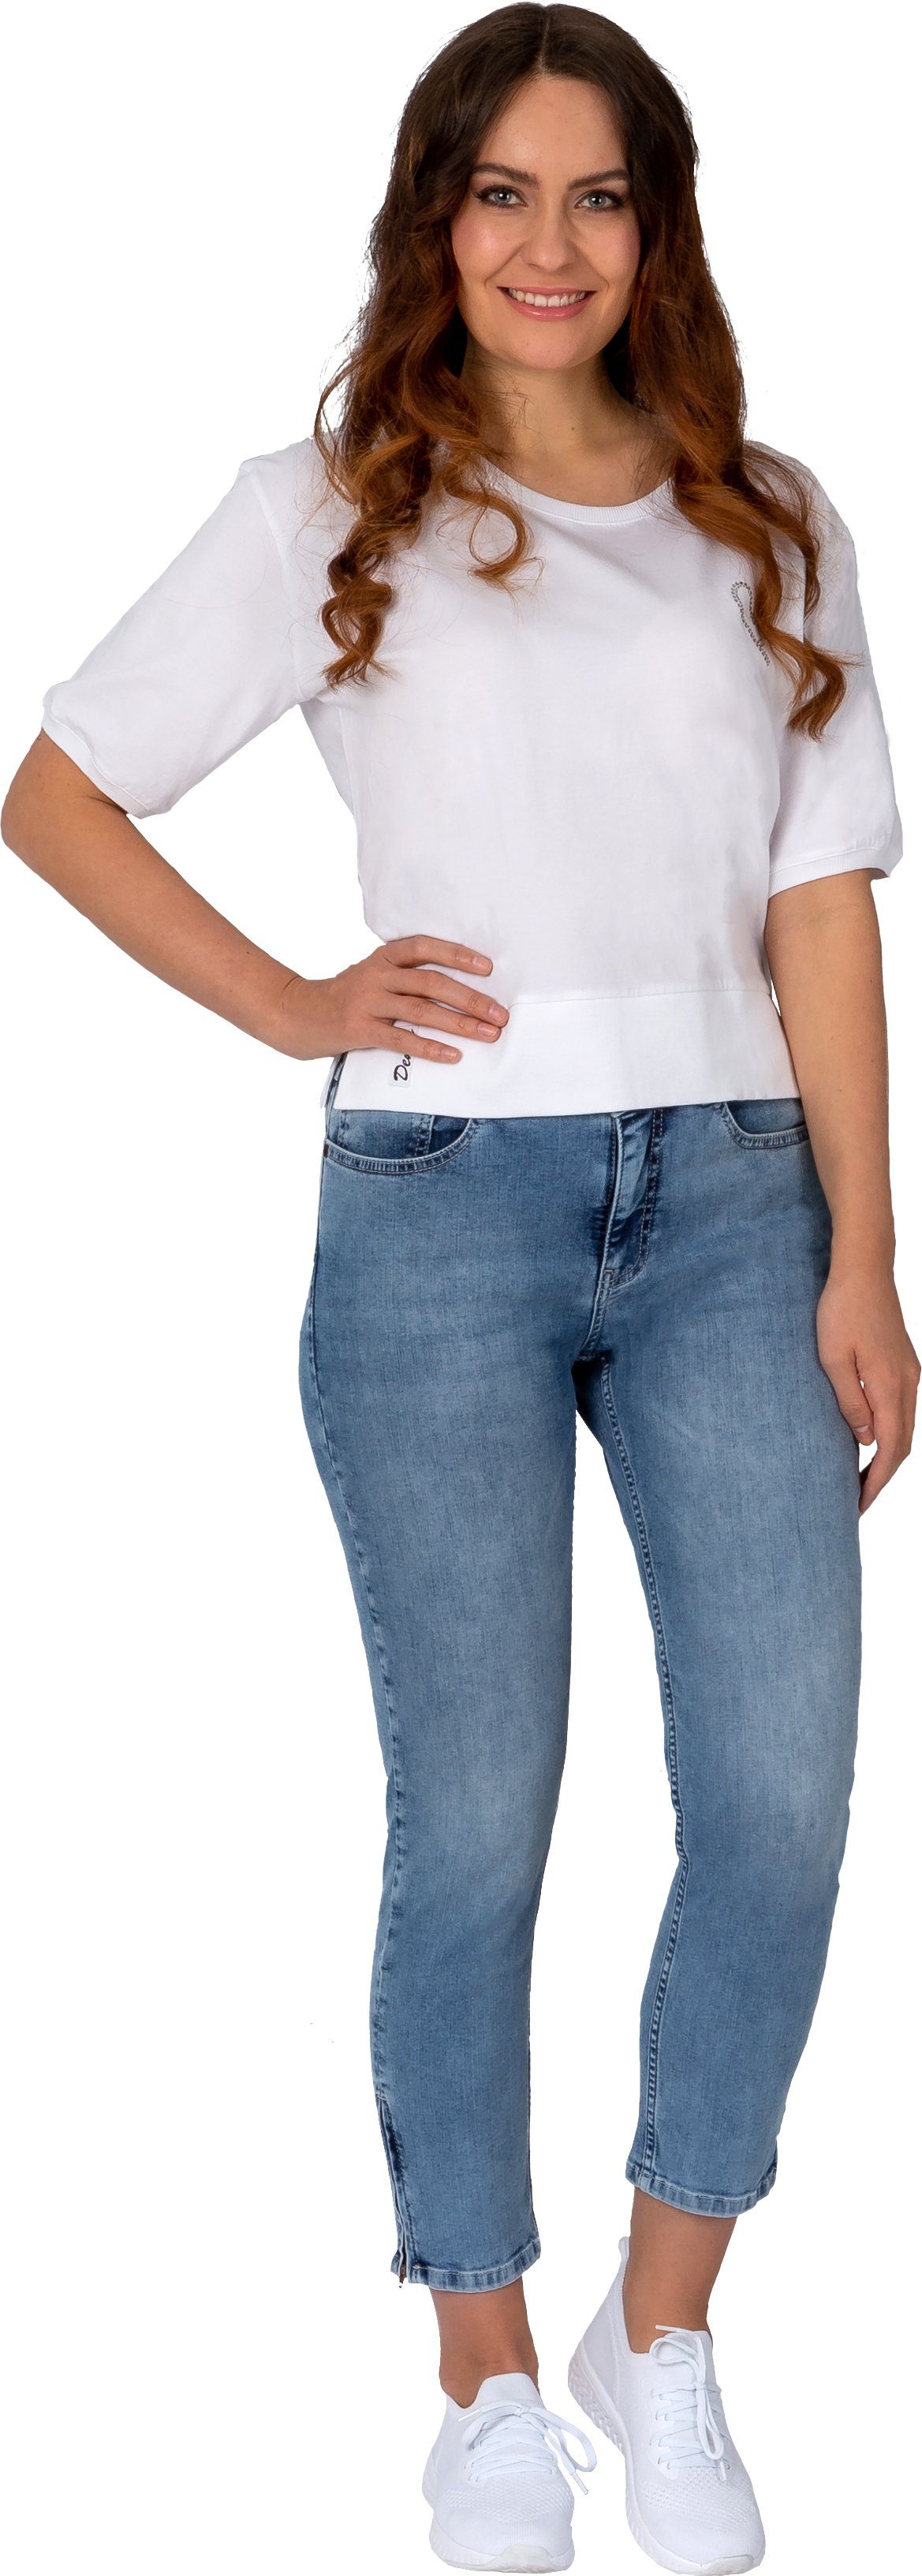 blue 5-Pocket-Style Milano Stretch-Jeans Gio-Lotti-1000 Gio bleached